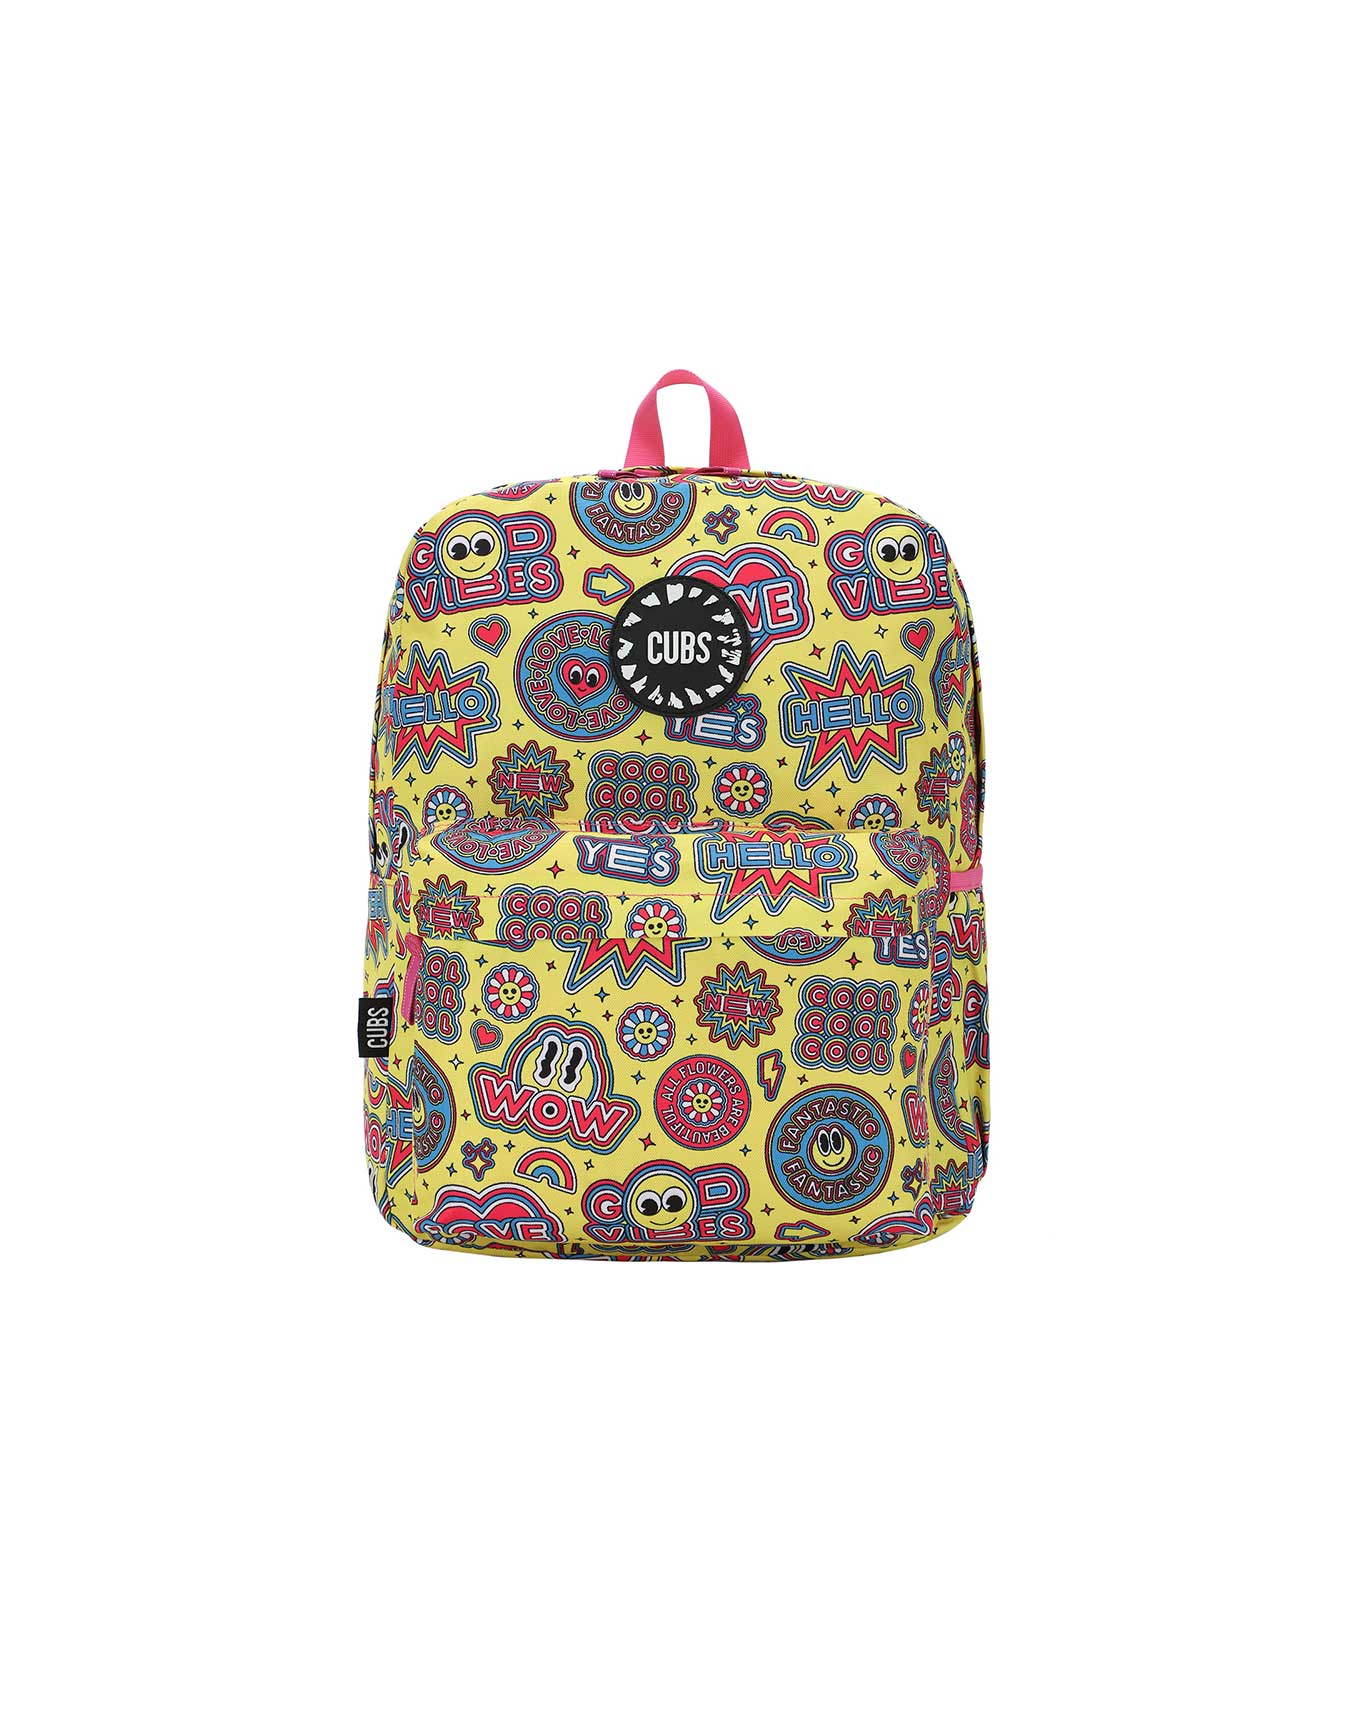 Good Vibes and Smiles Junior Student Backpack